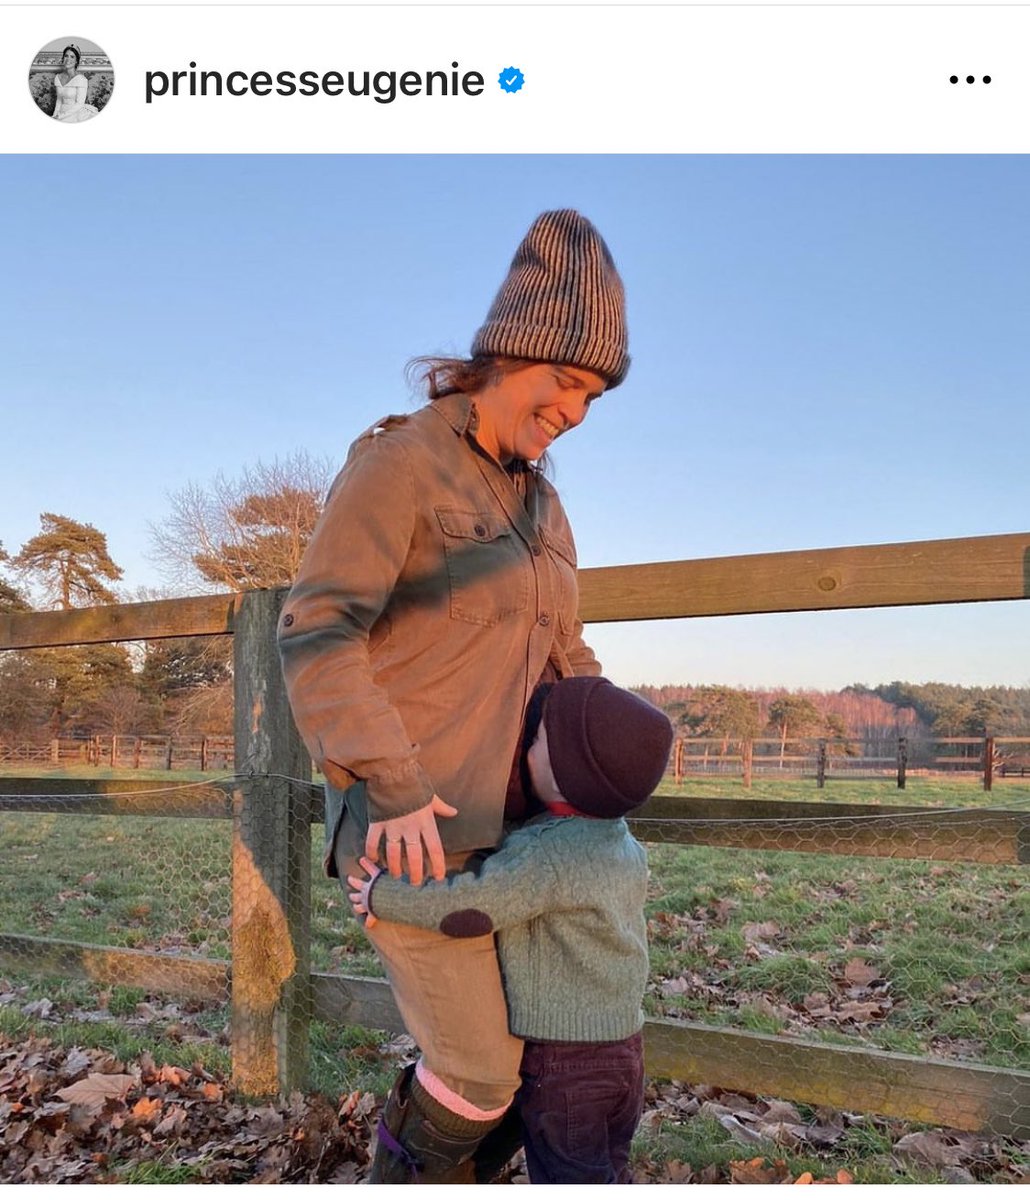 Congratulations to HRH Princess Eugenie and her husband Jack Brooksbank on the exciting news of the announcement that they’re expecting their second child @RoyalFamily. 📸 from HRH’s @instagram account. #RoyalFamily #PrincessEugenie #RoyalBaby #HRH